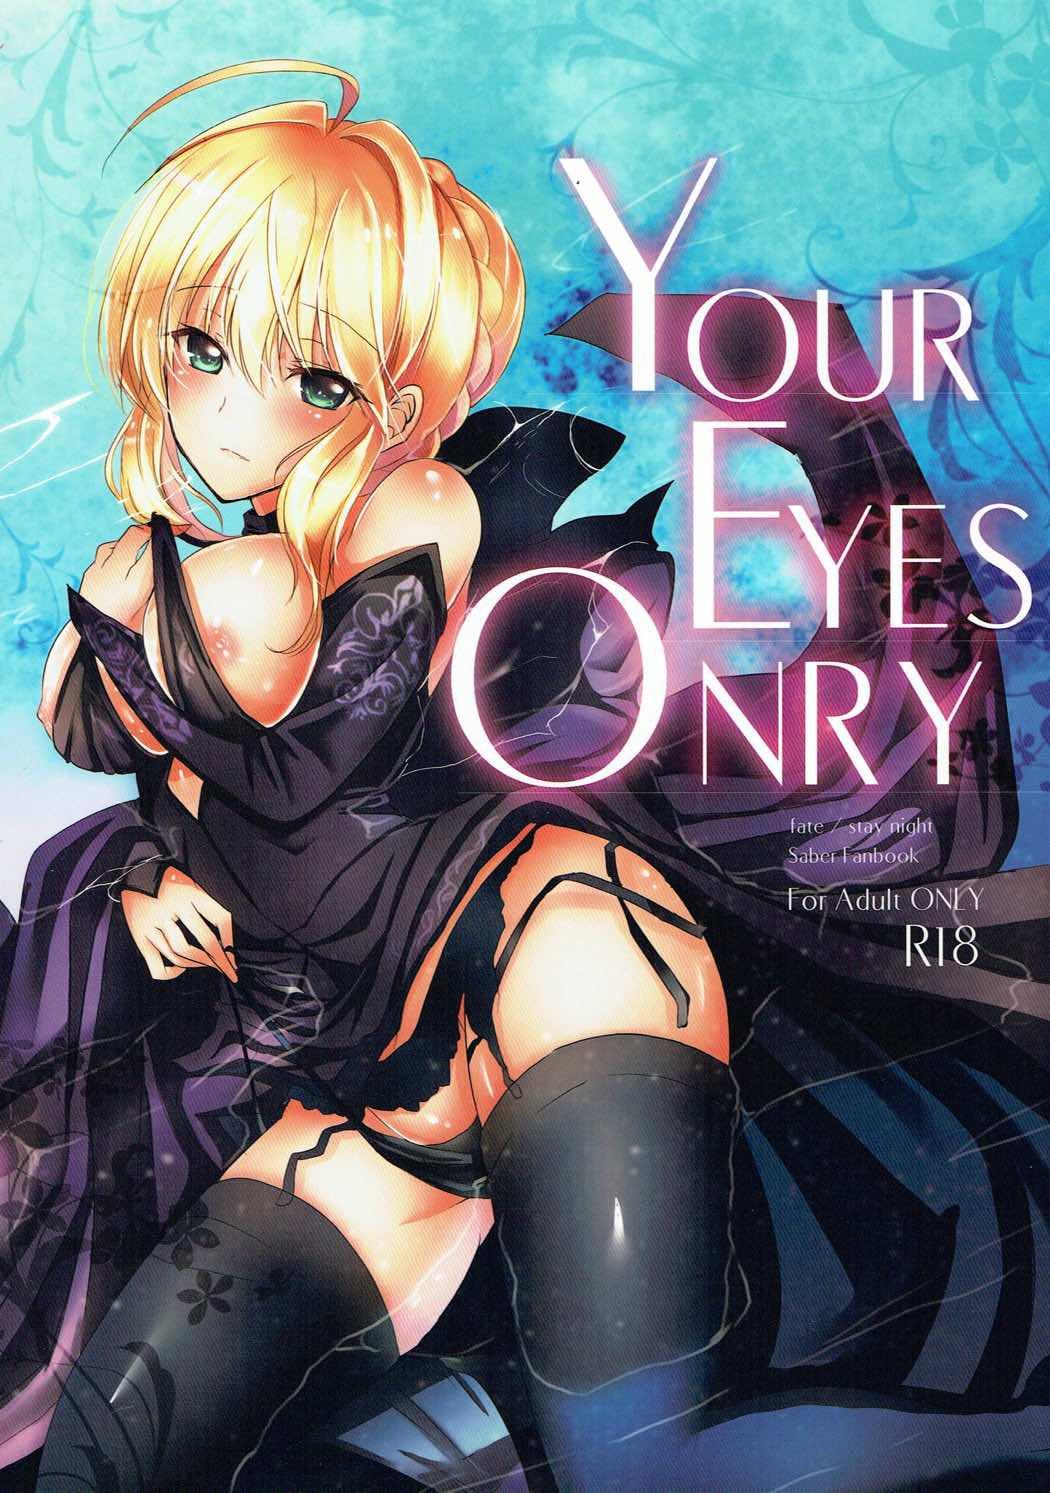 Real Orgasm YOUR EYES ONRY - Fate stay night Sex Party - Picture 1